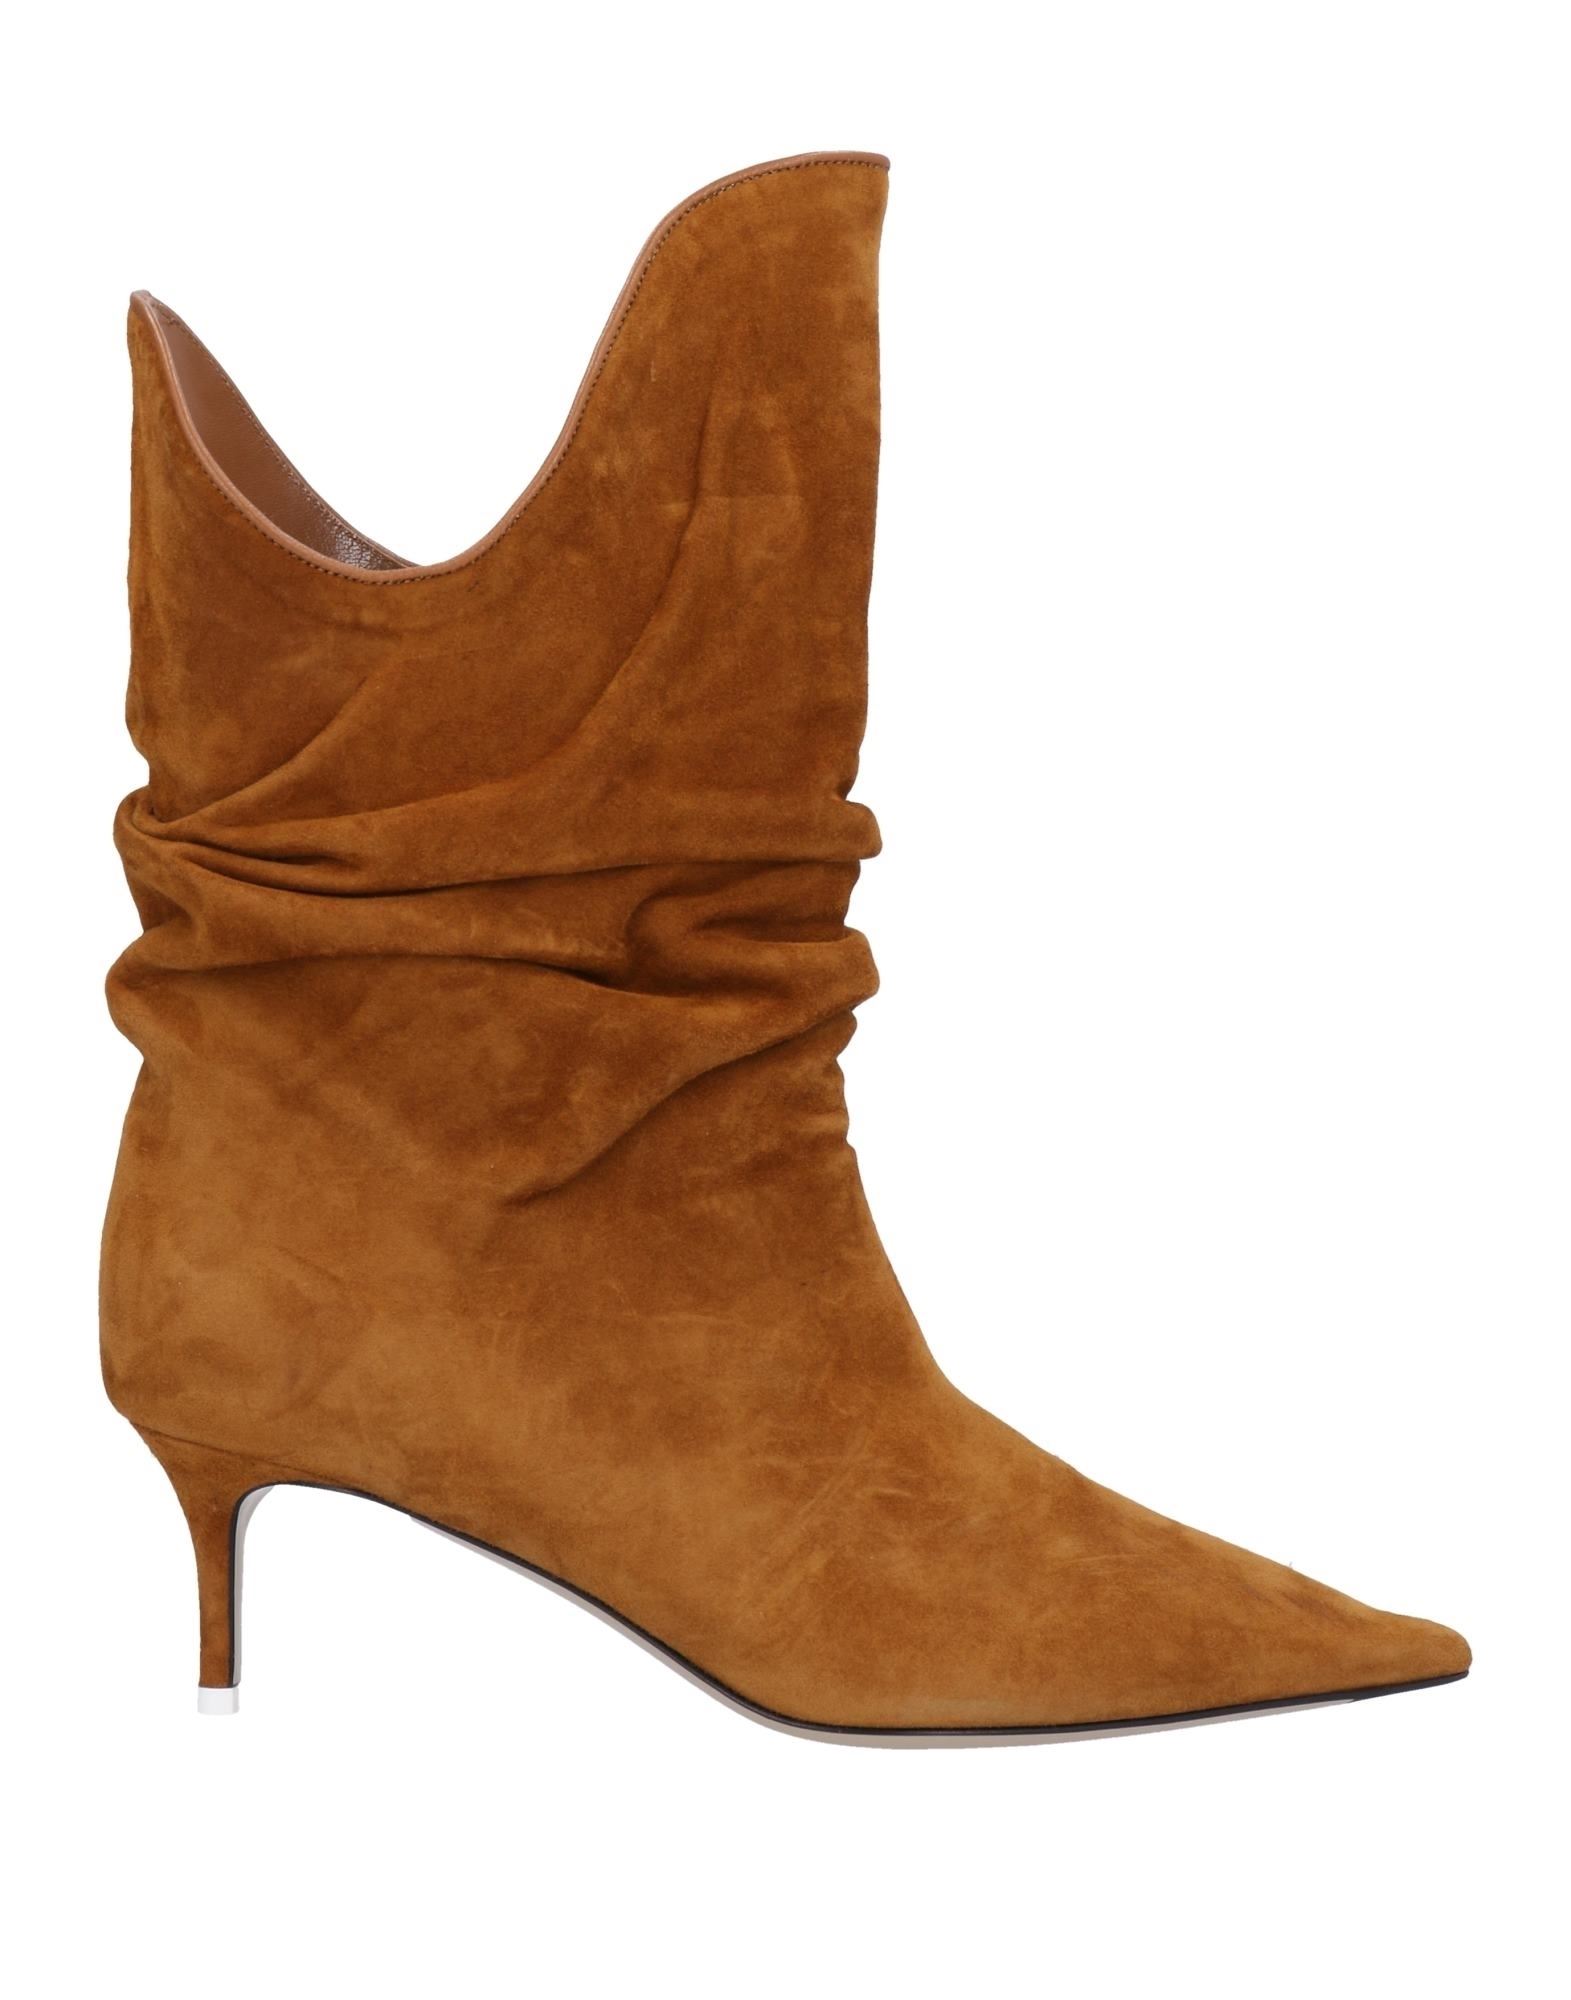 Attico Tate Suede Shaped Boots In Camel Color |